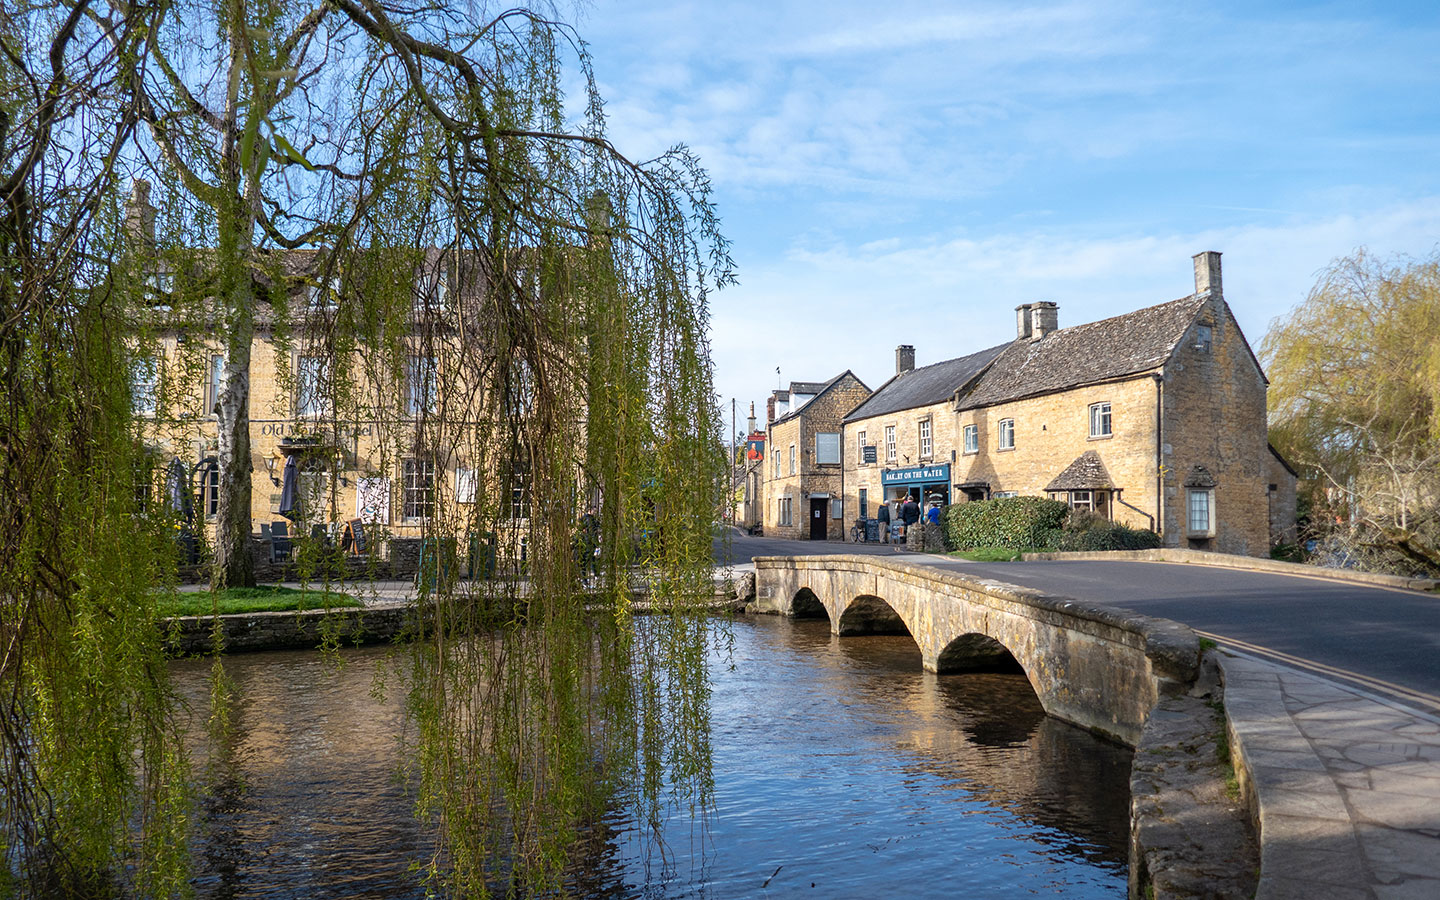 Early morning in Bourton-on-the-Water, Cotswolds